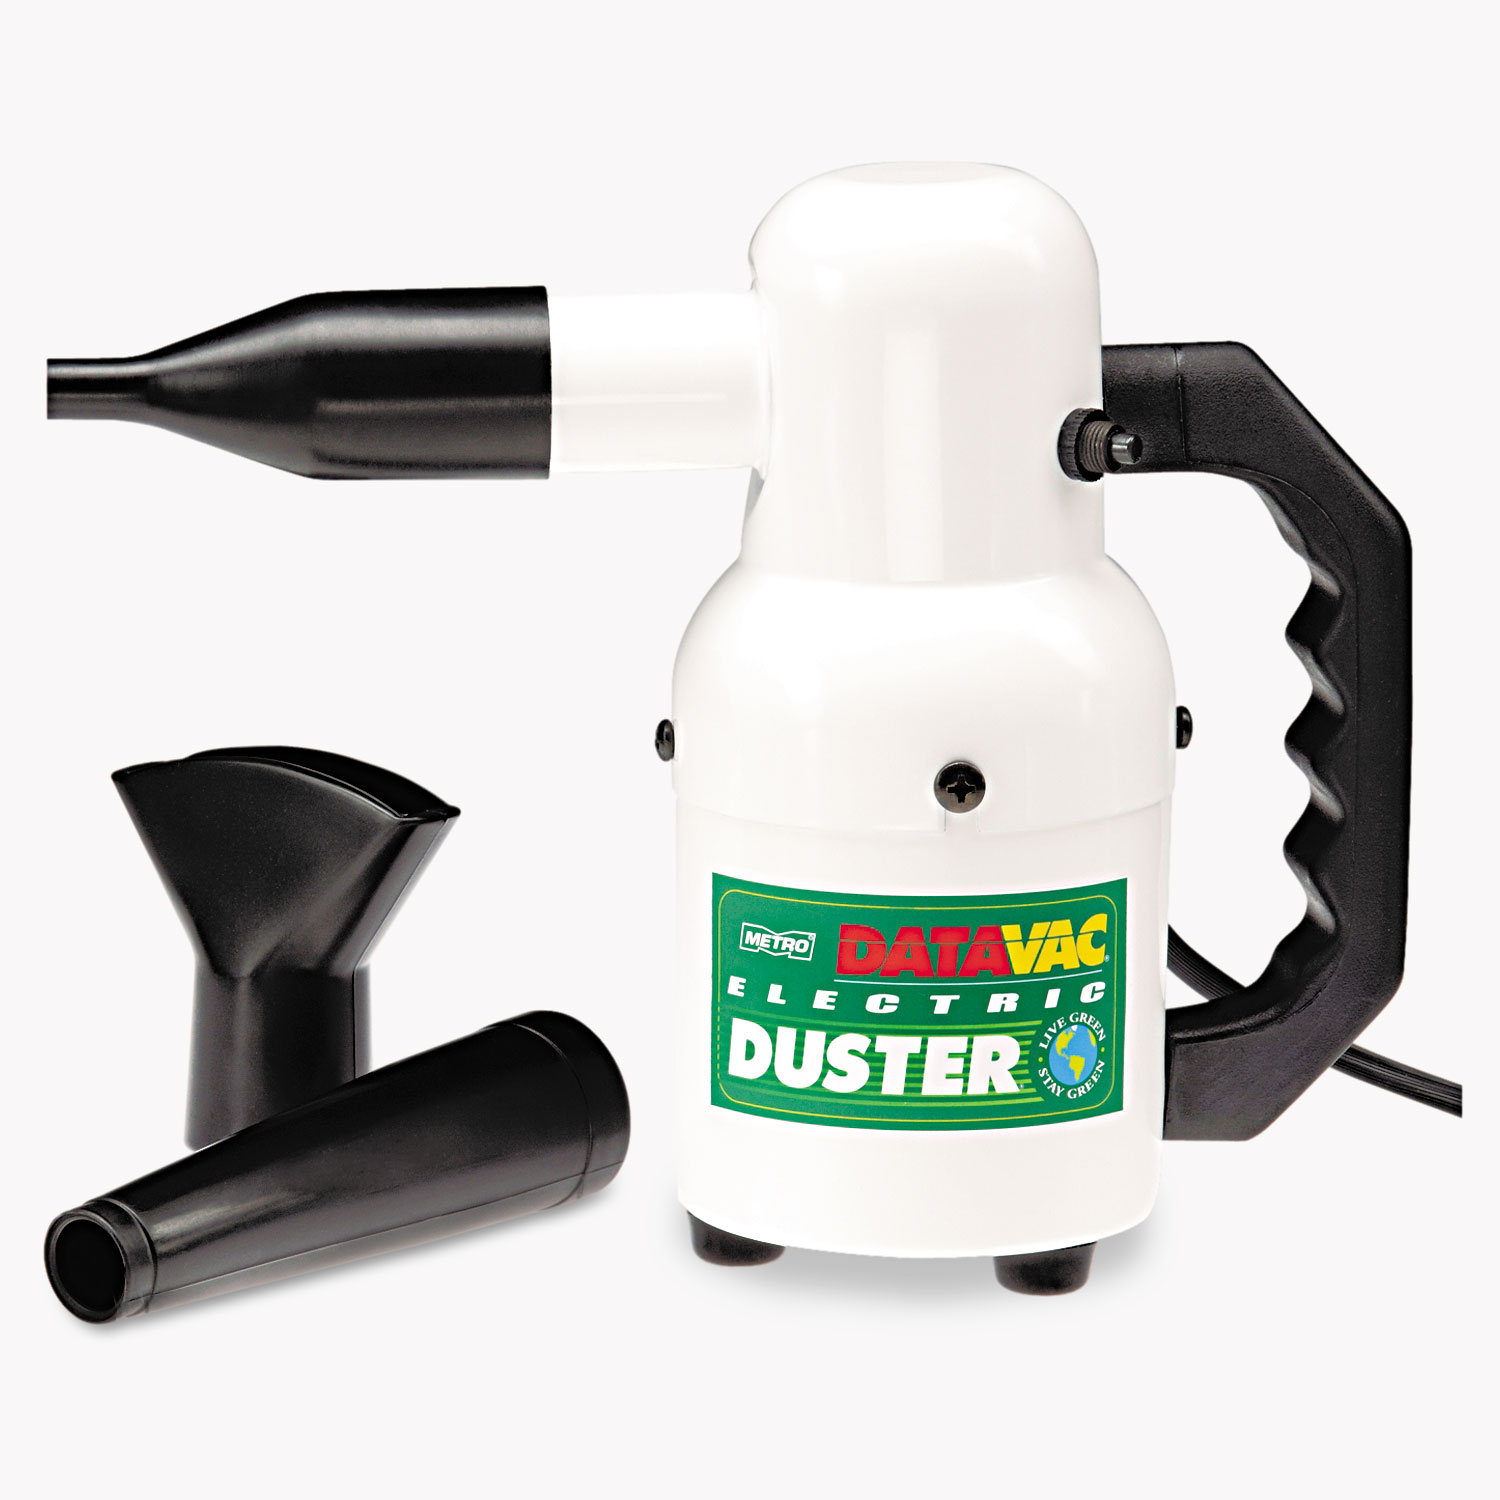  DataVac 117-117308 Electric Duster Cleaner, Replaces Canned Air, Powerful and Easy to Blow Dust Off (MEVED500) 